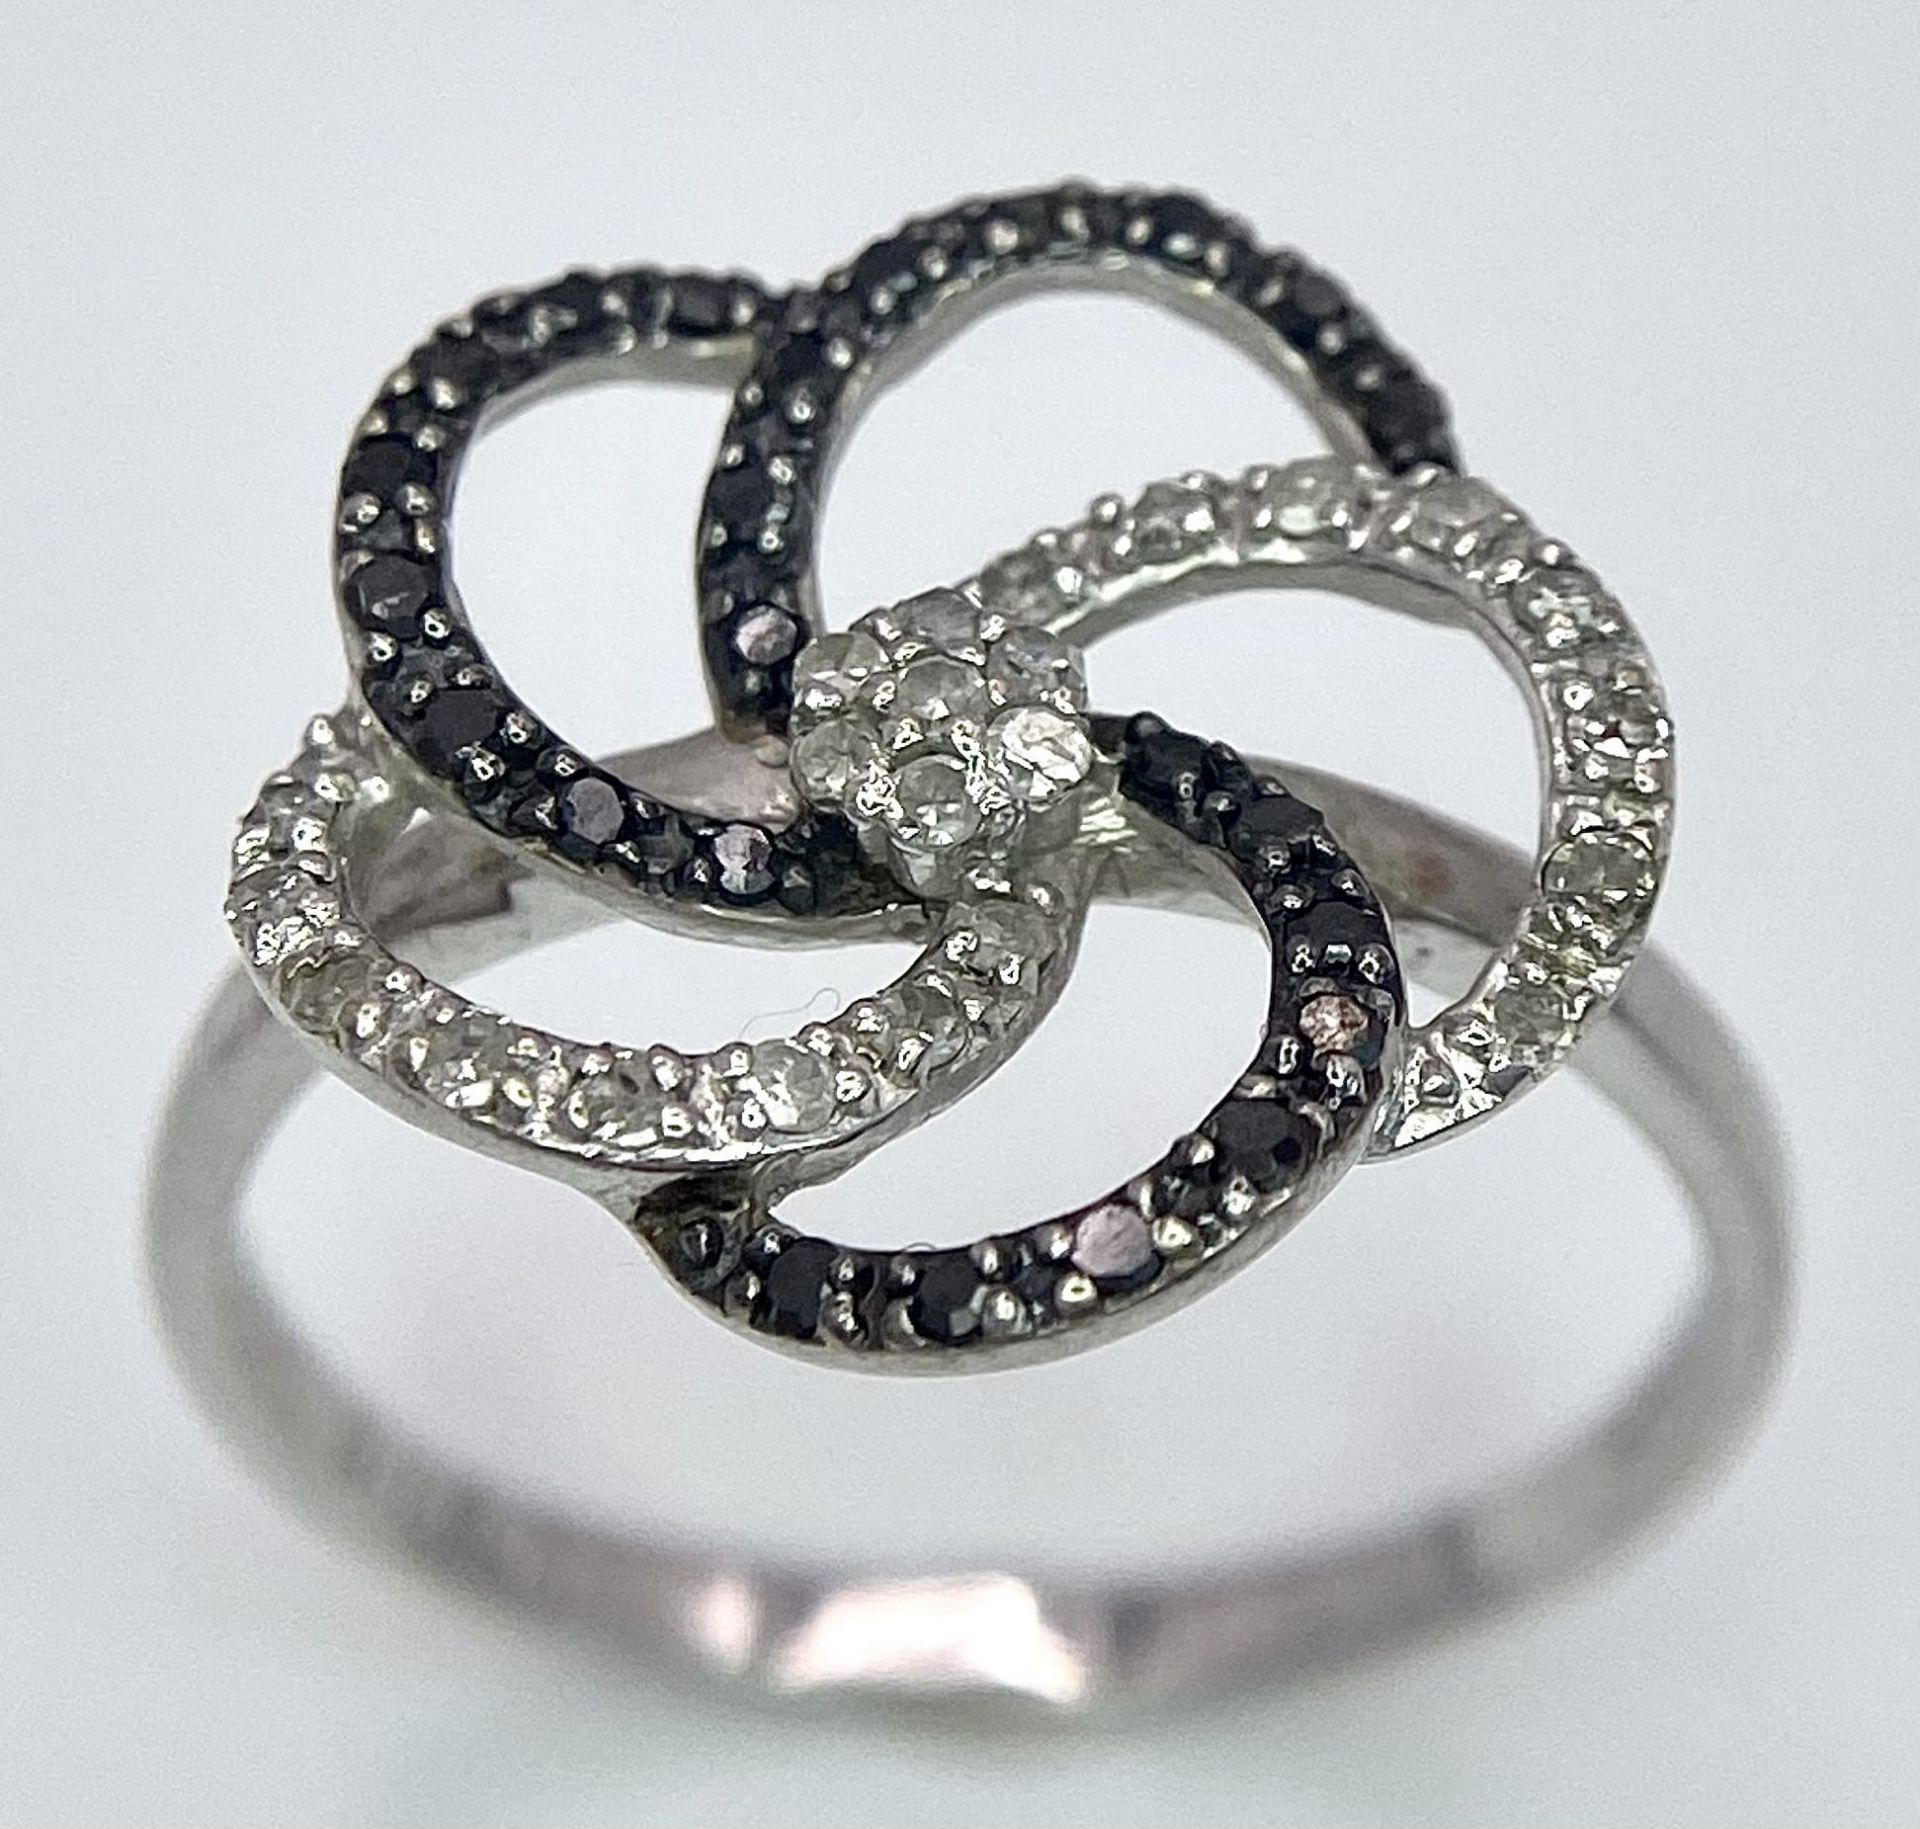 A 9K White Gold Black ad White Diamond Decorative Floral Ring. Size N. 2g total weight. - Image 2 of 7